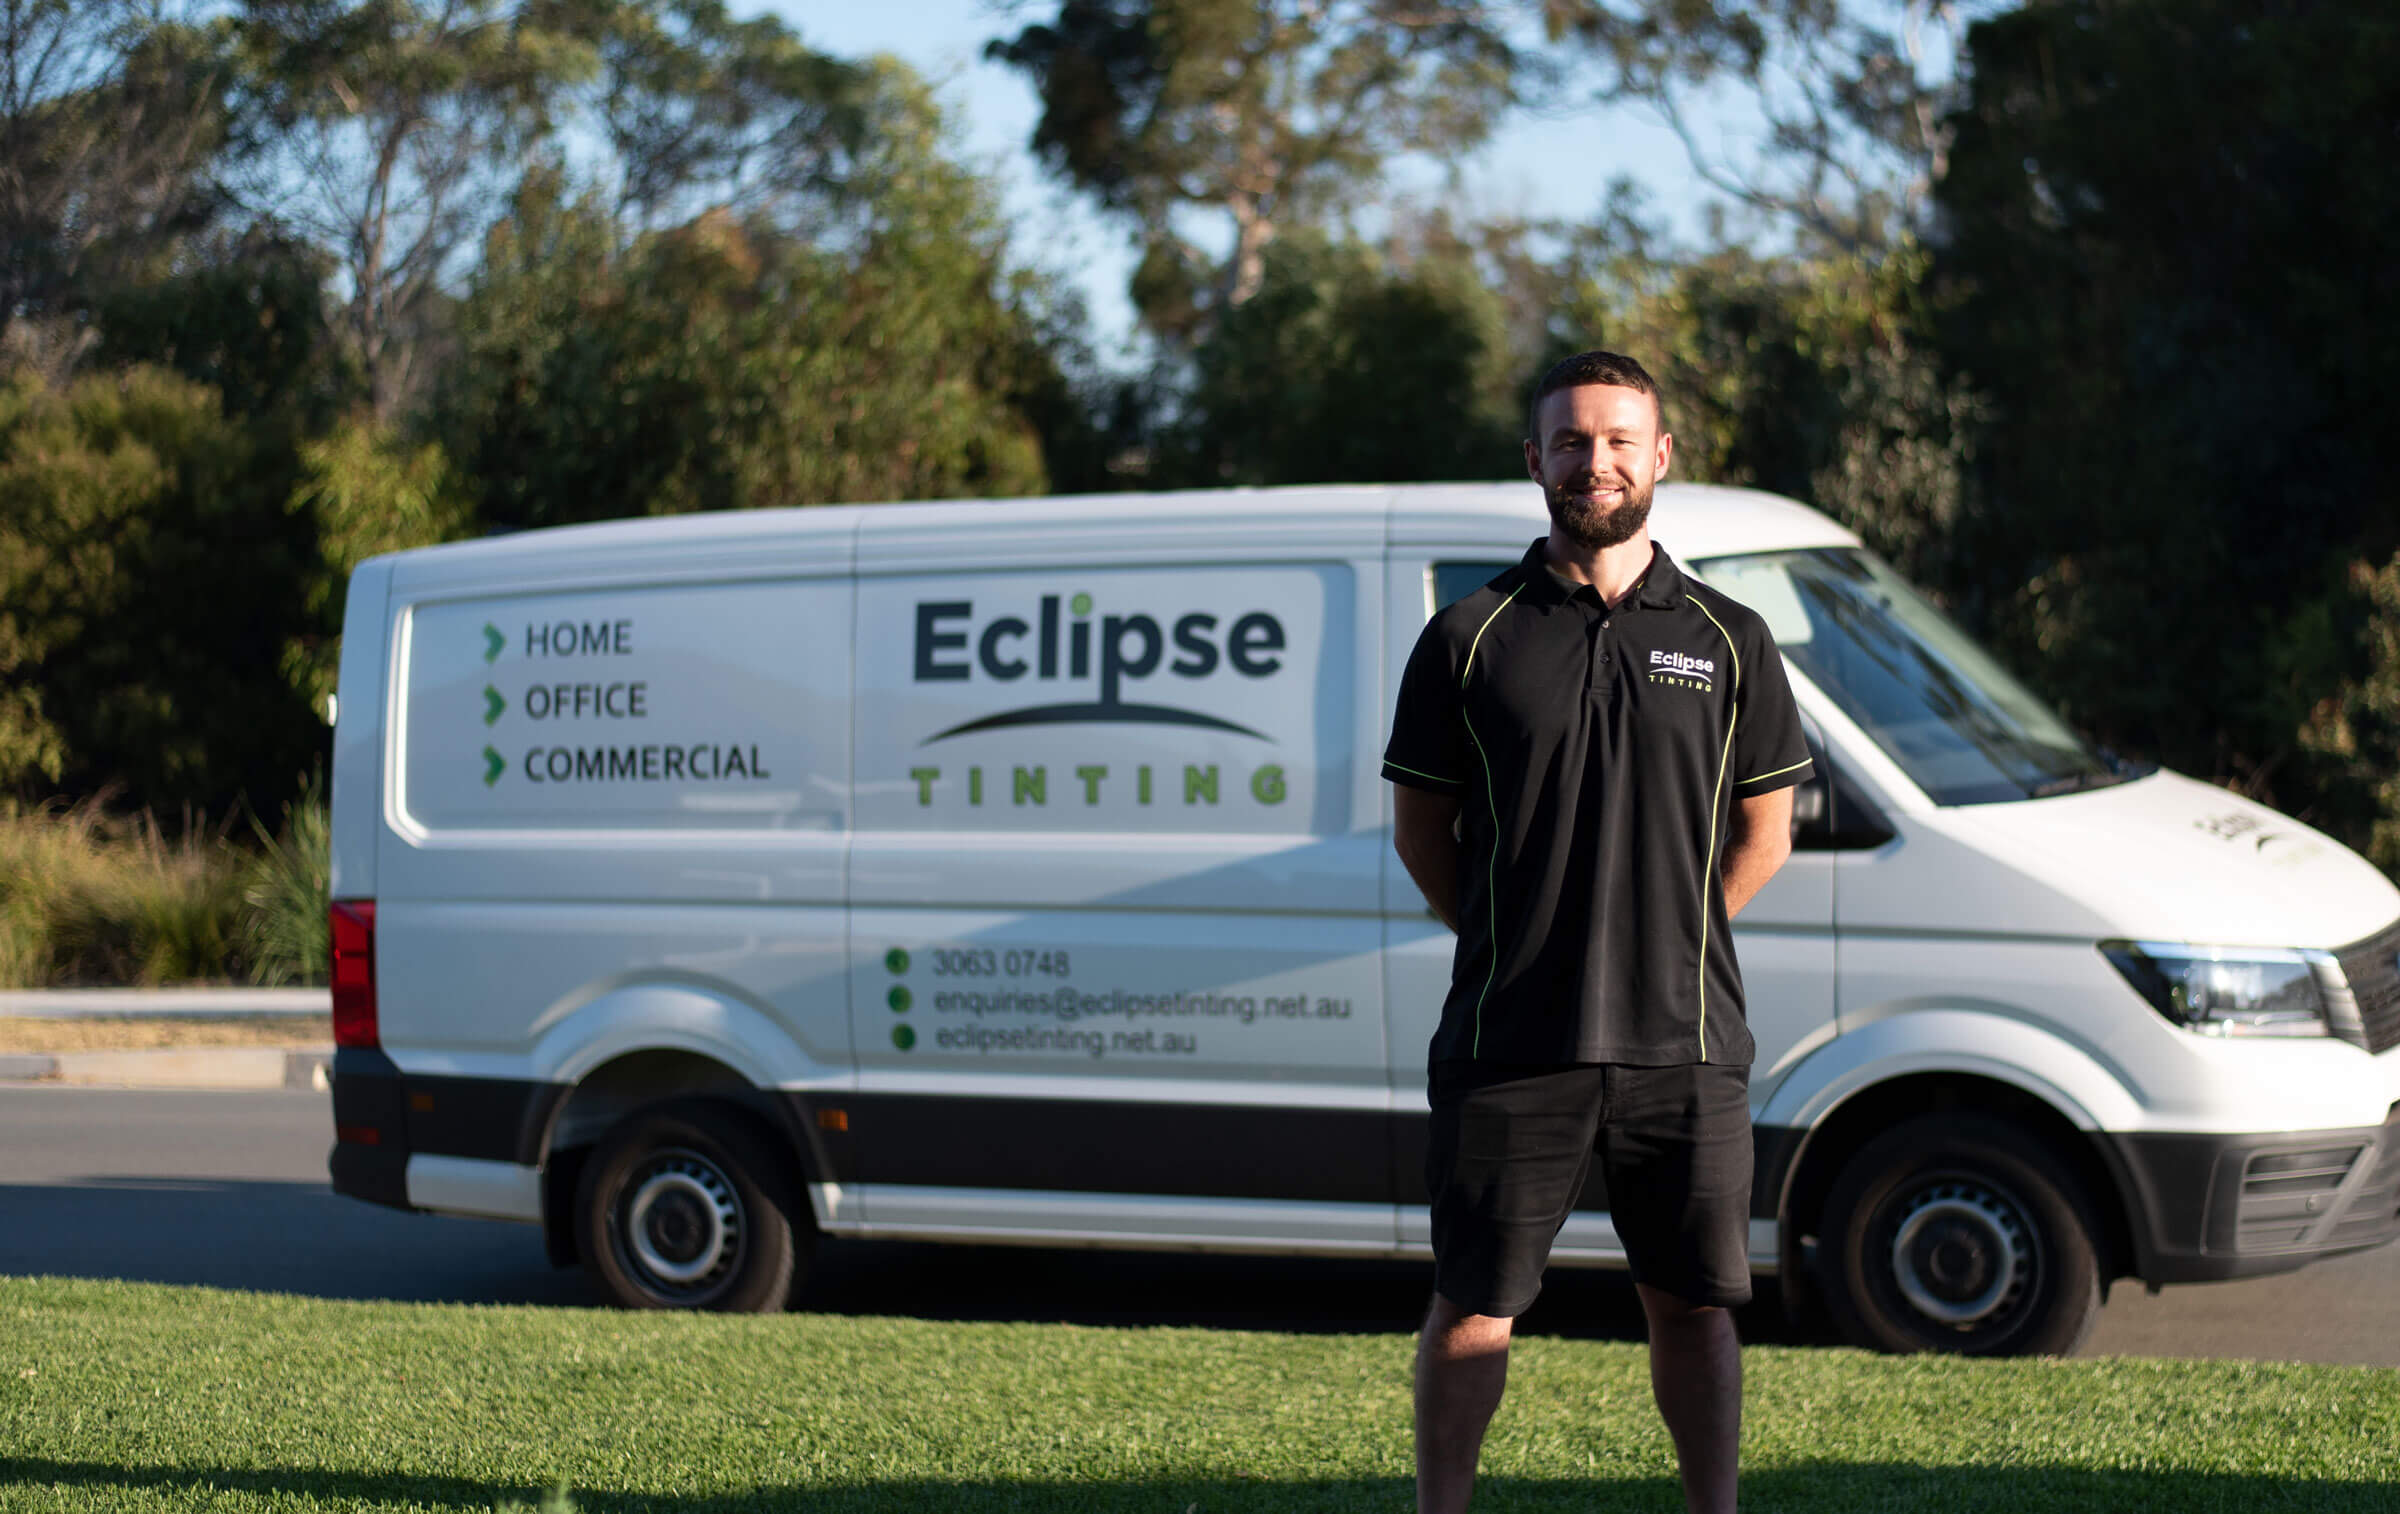 Eclipse window tinting Brisbane and other locations